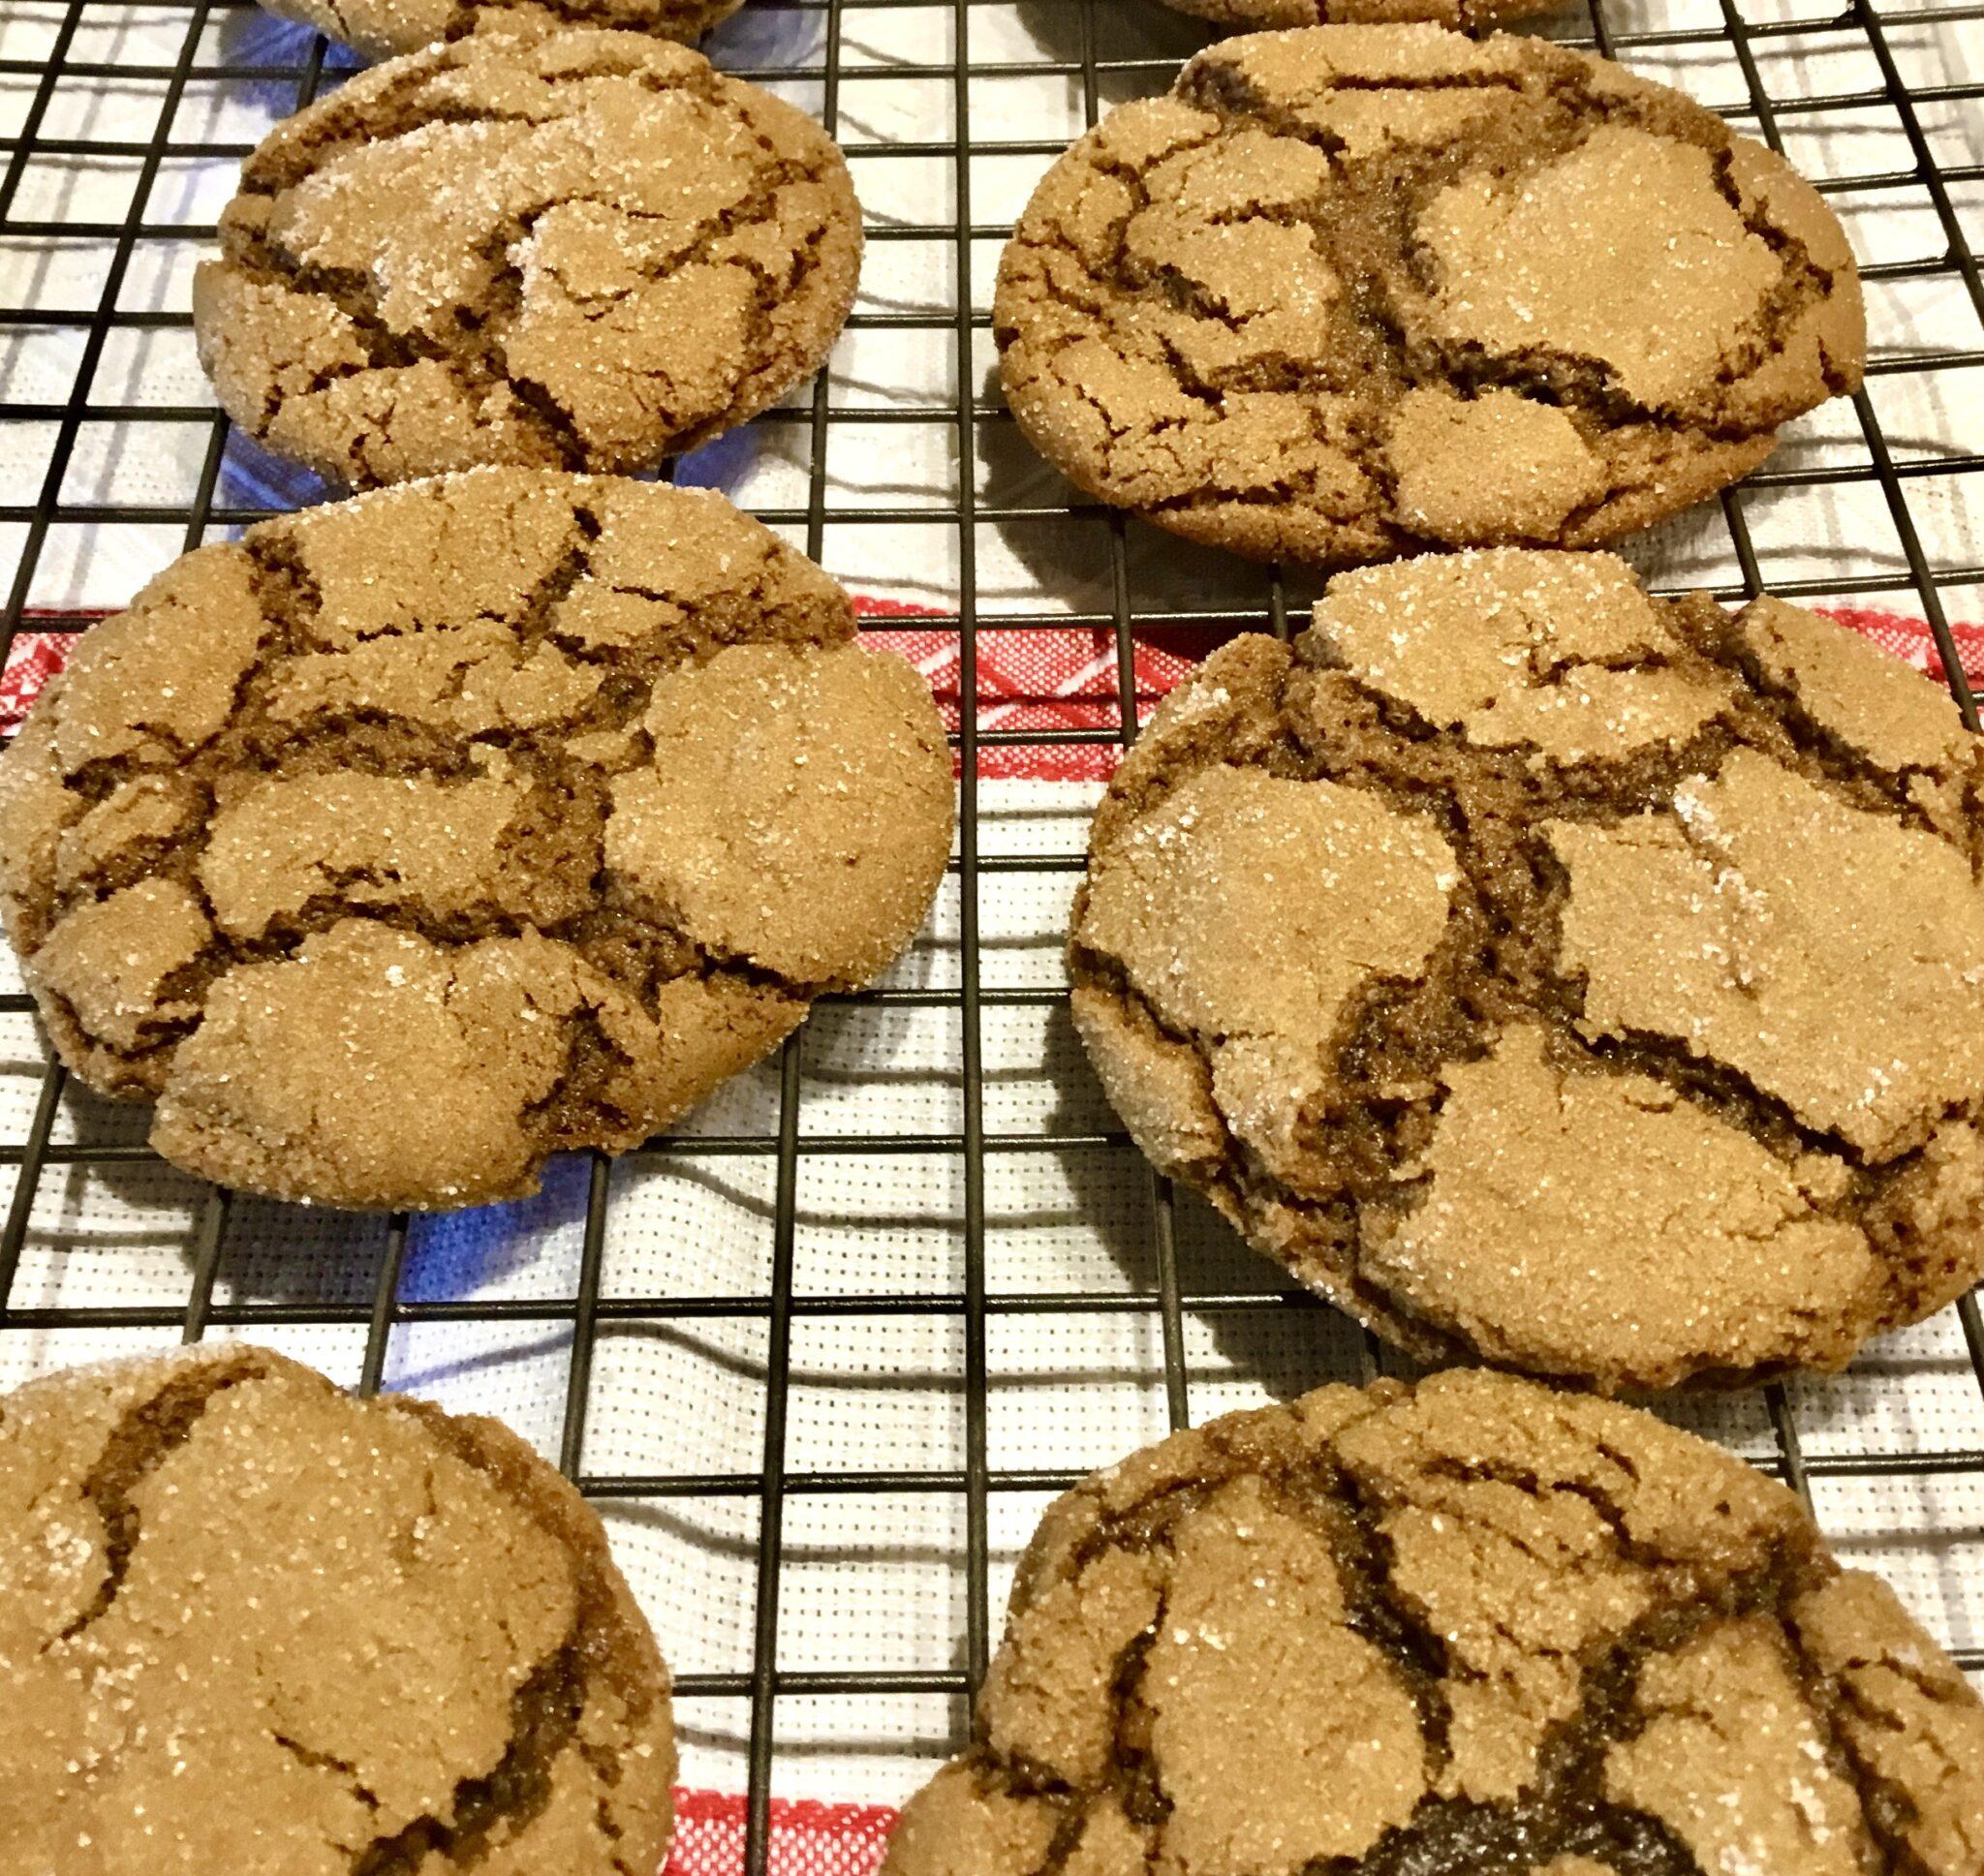 Molasses Ginger Cookies on a rack just out of the oven